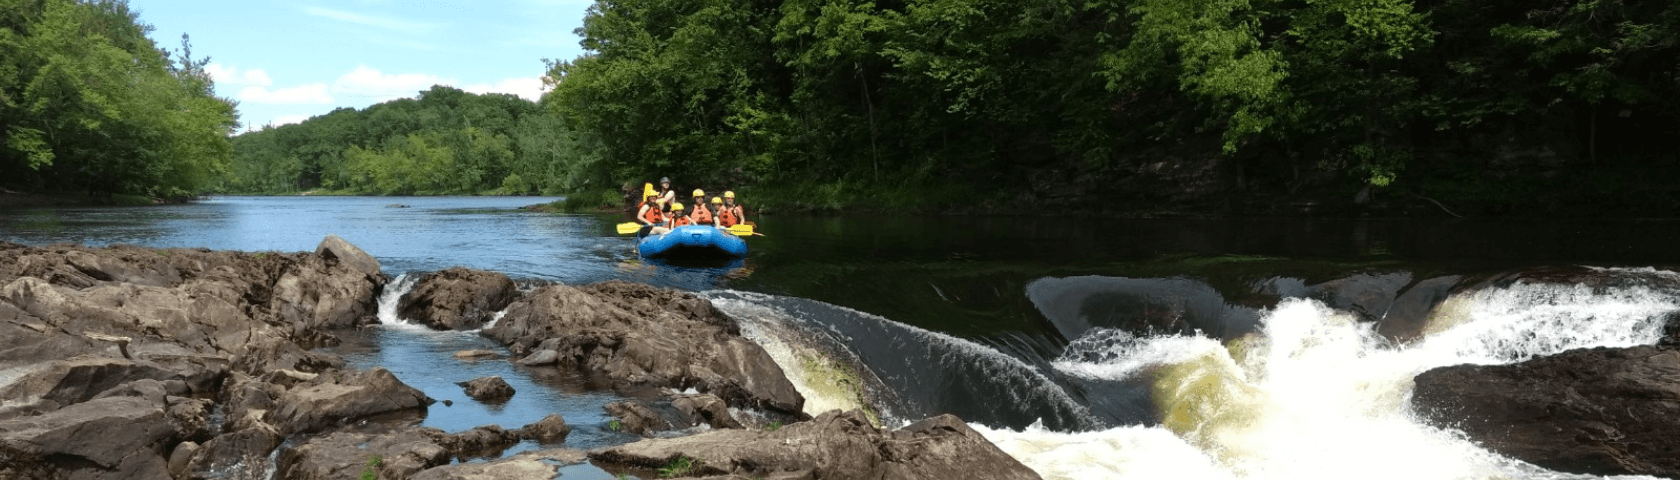 Raft group approaching a small rapid